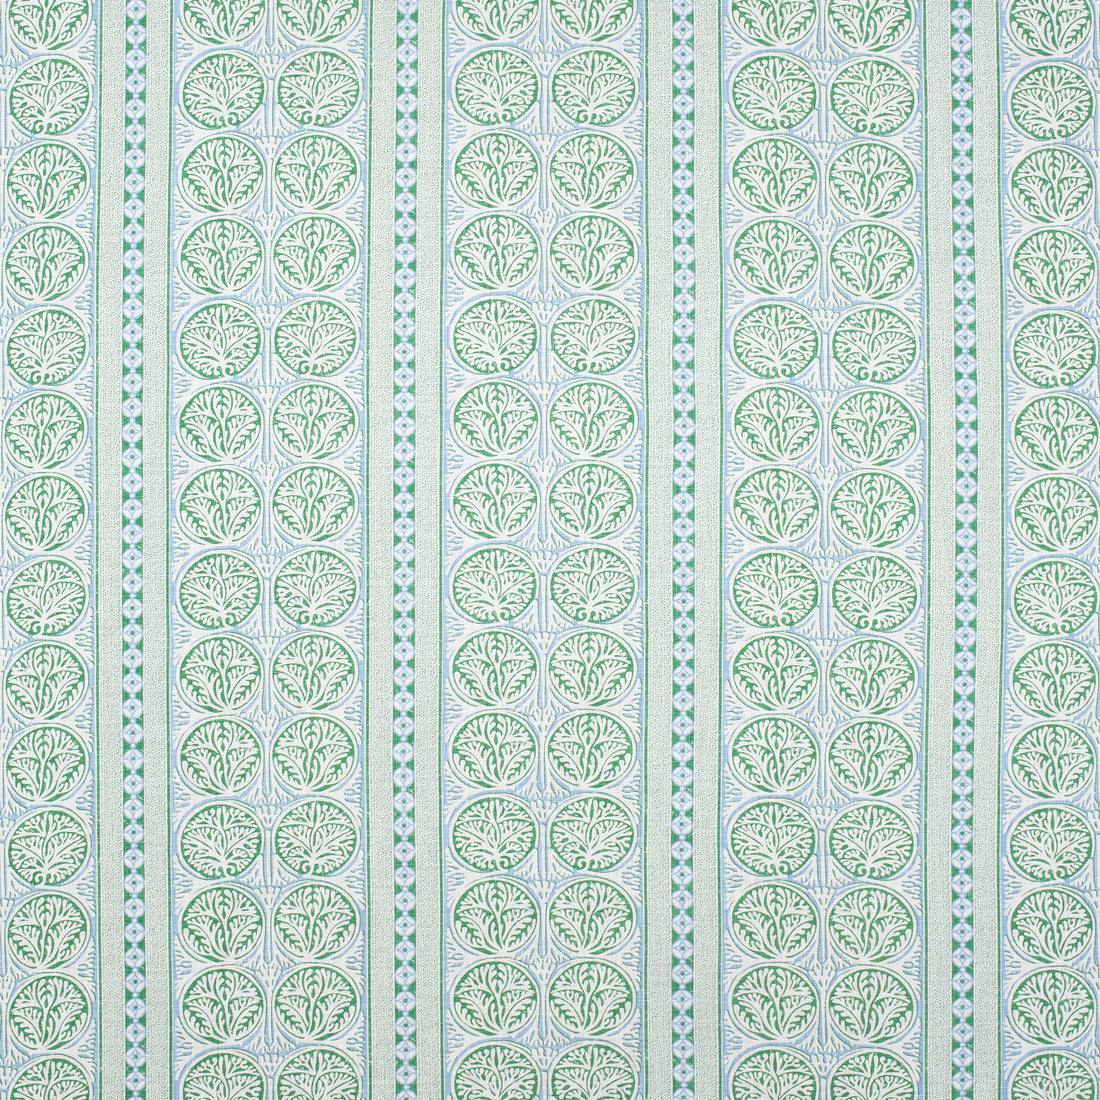 Fair Isle fabric in green and blue color - pattern number F988732 - by Thibaut in the Trade Routes collection